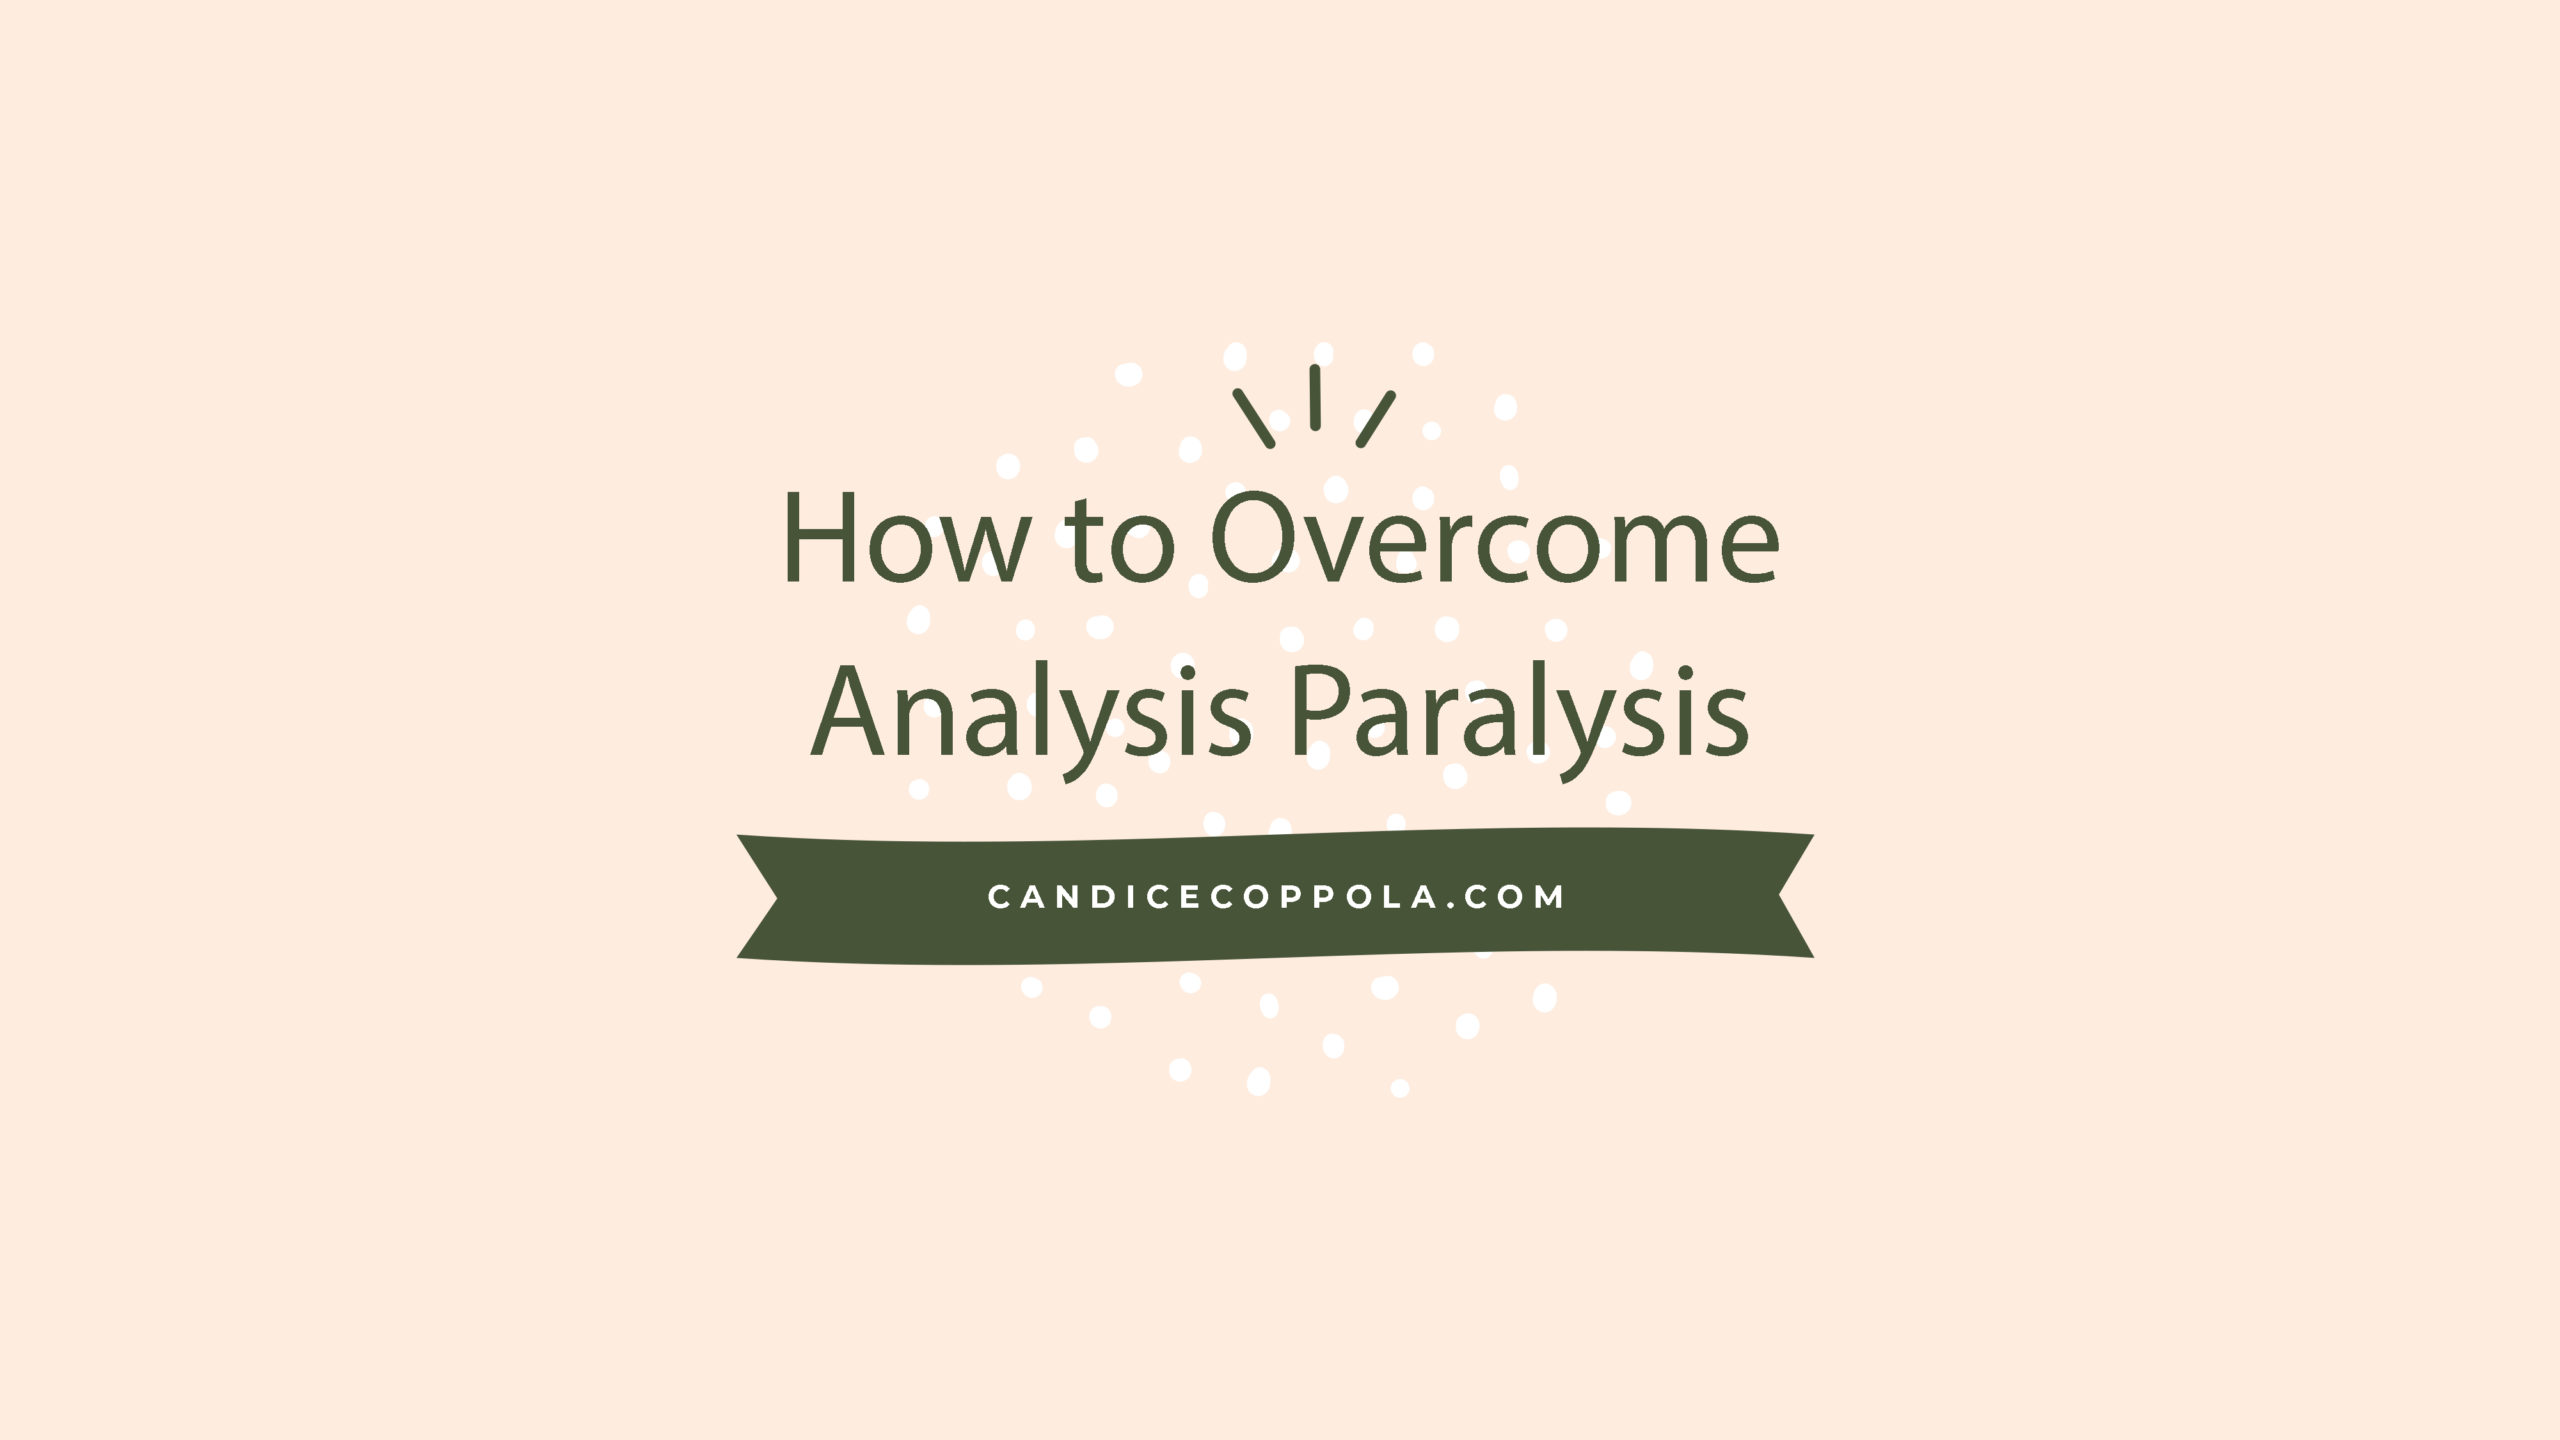 What is analysis paralysis and how to overcome it 